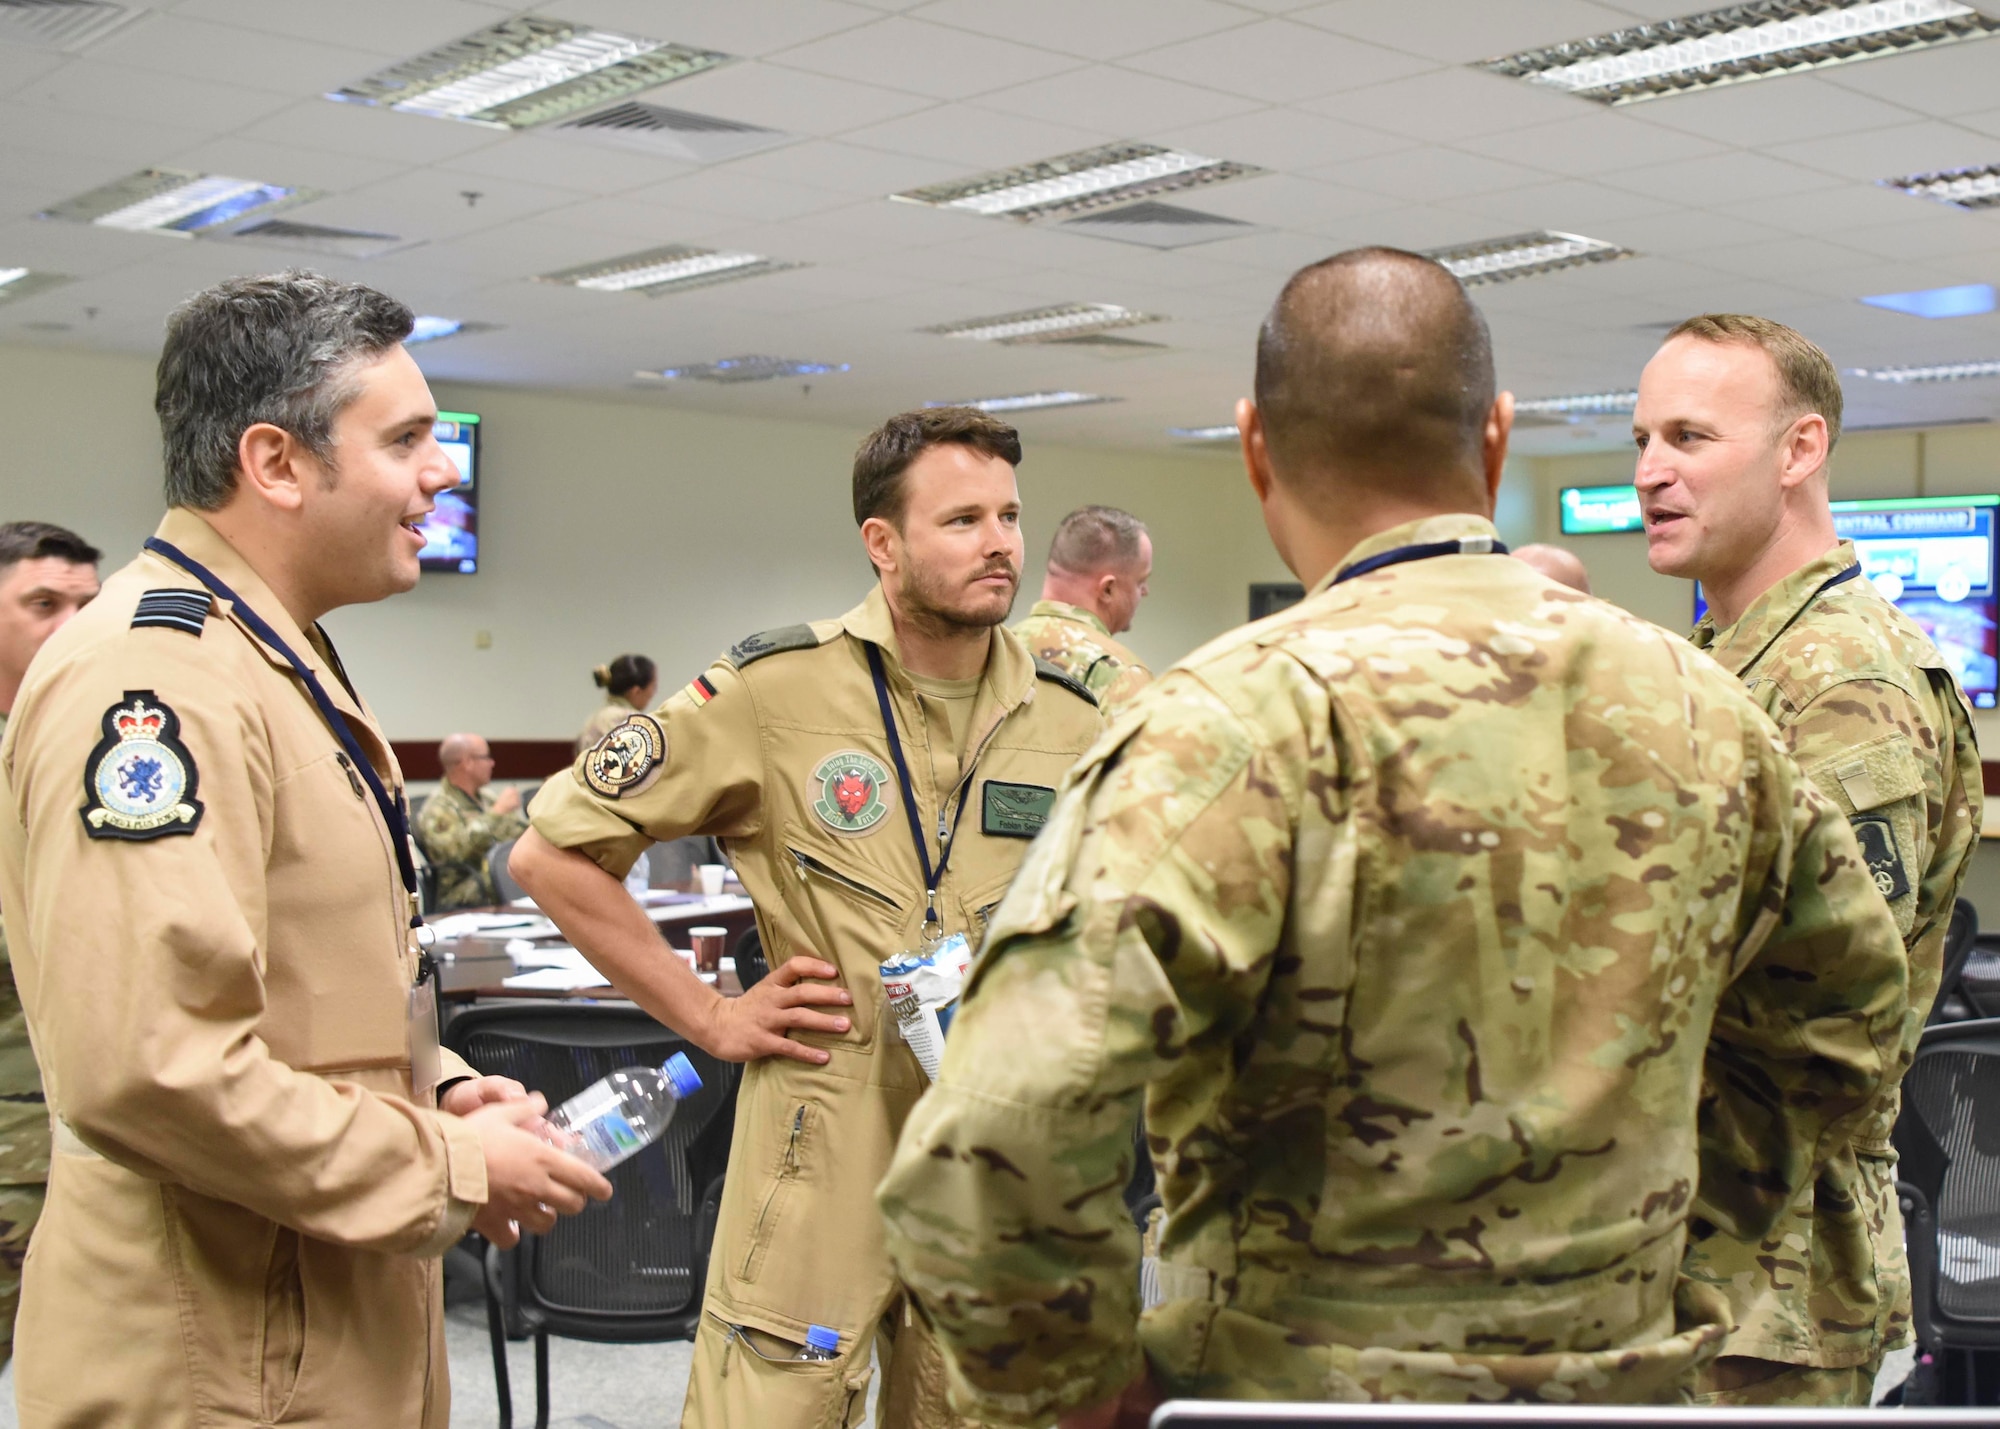 Group of U.S. and Coalition service members has a chat.